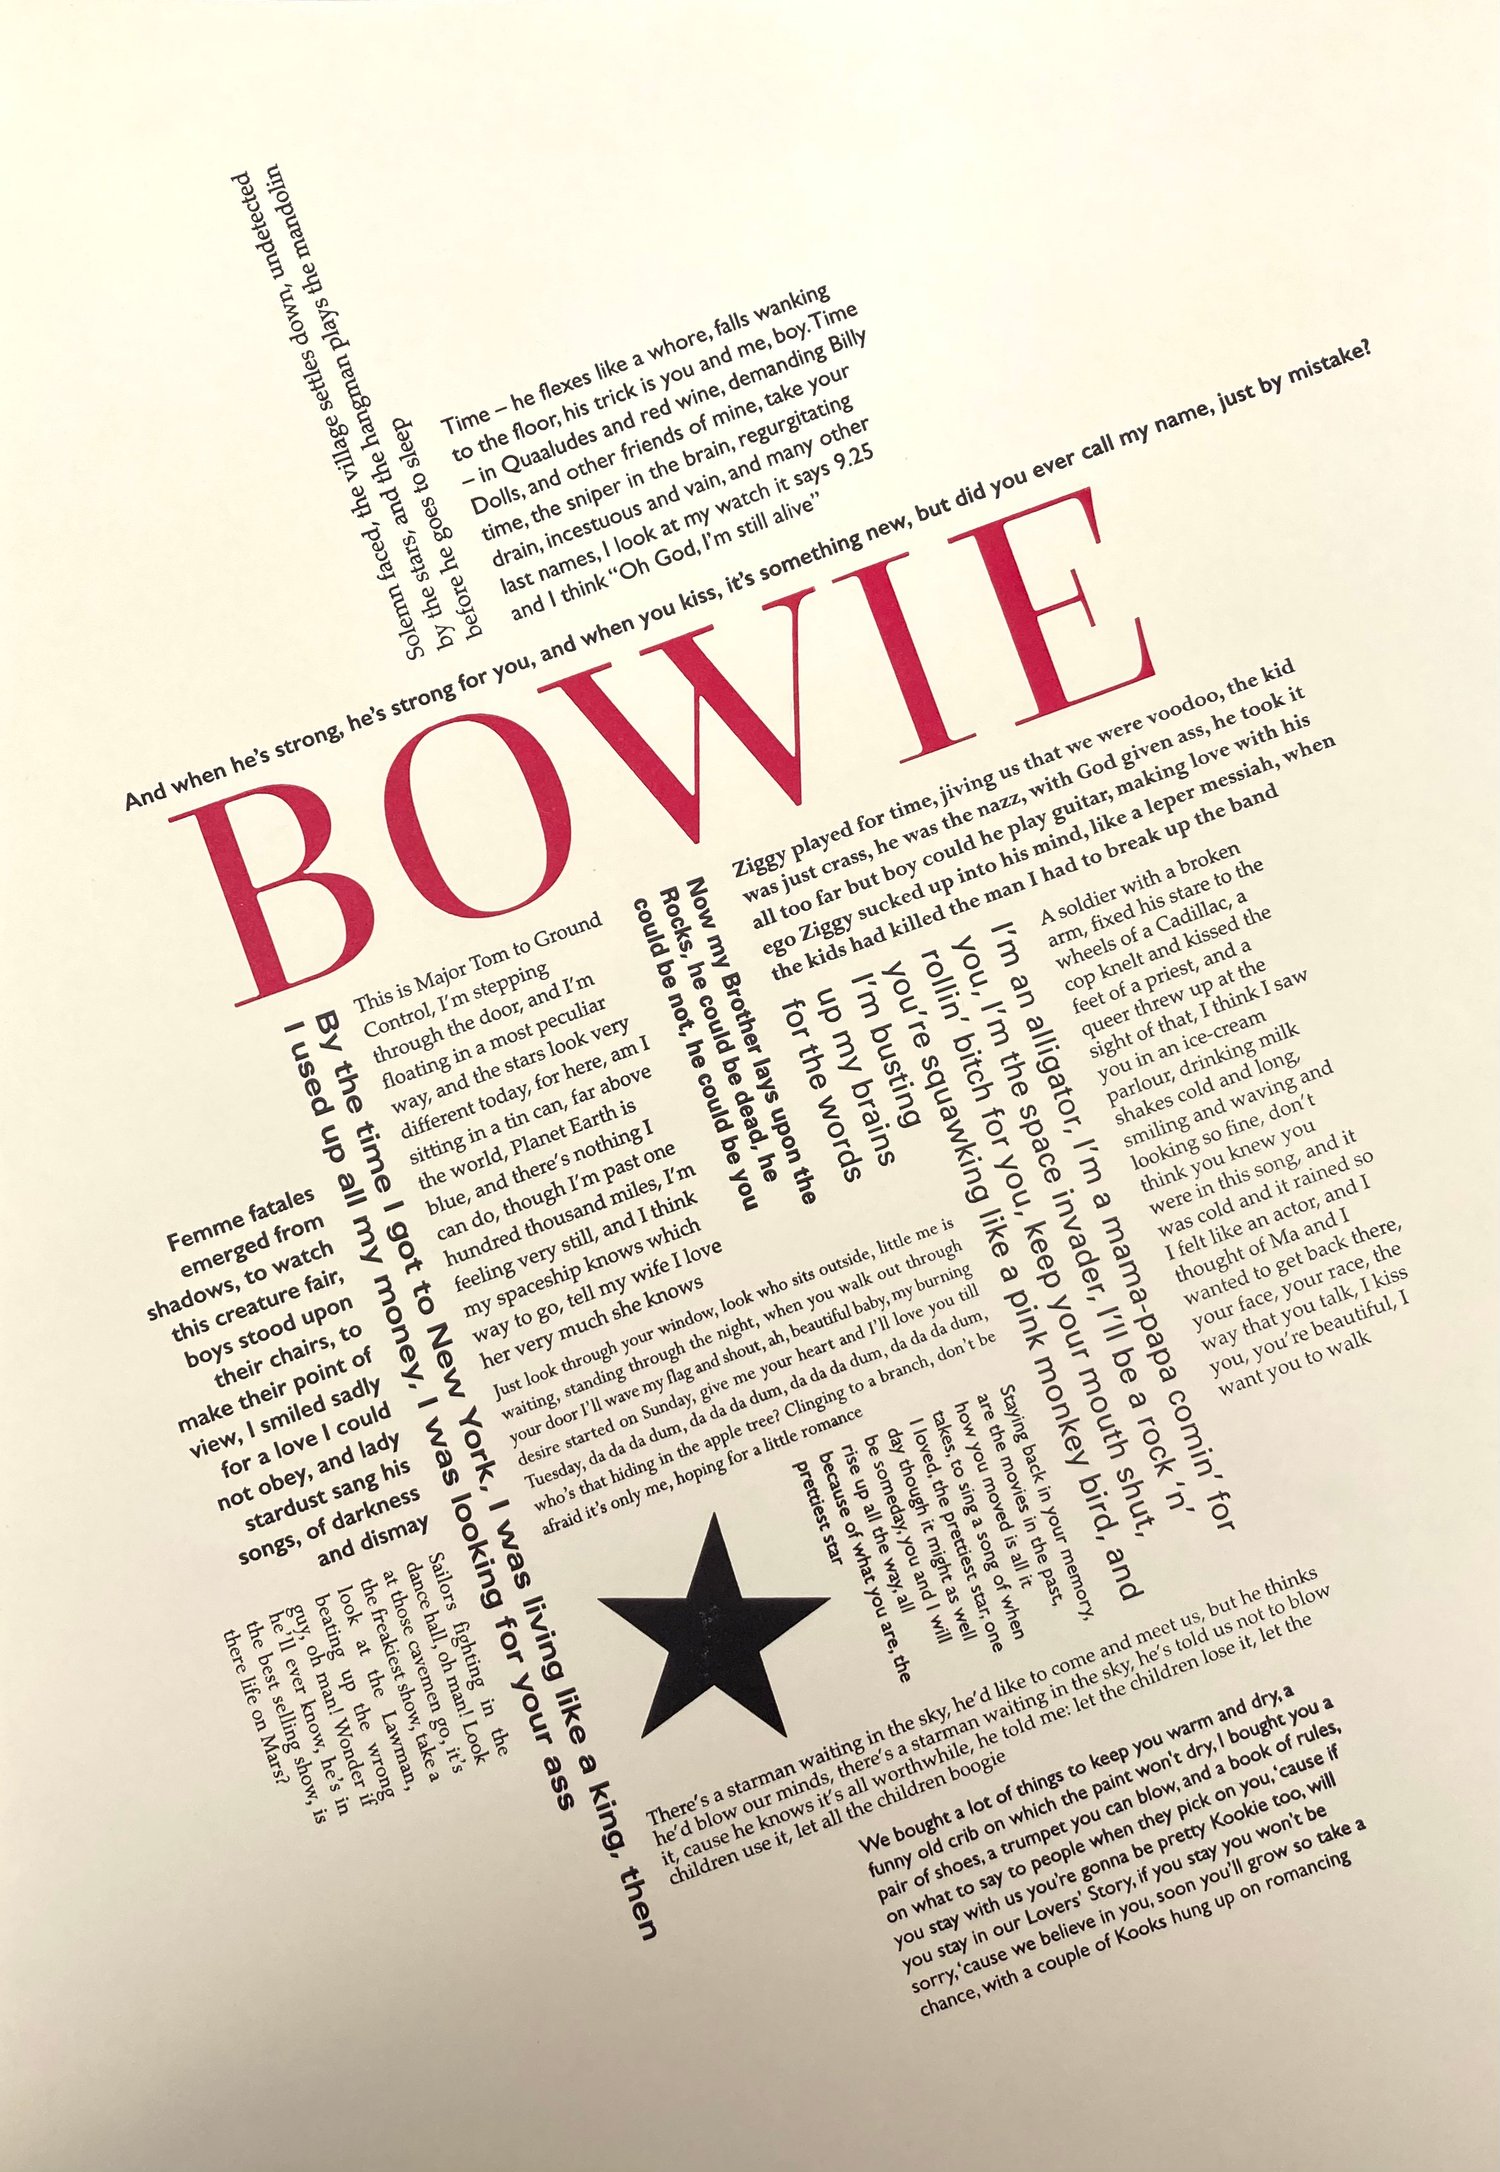 Image of Bowie deconstructed